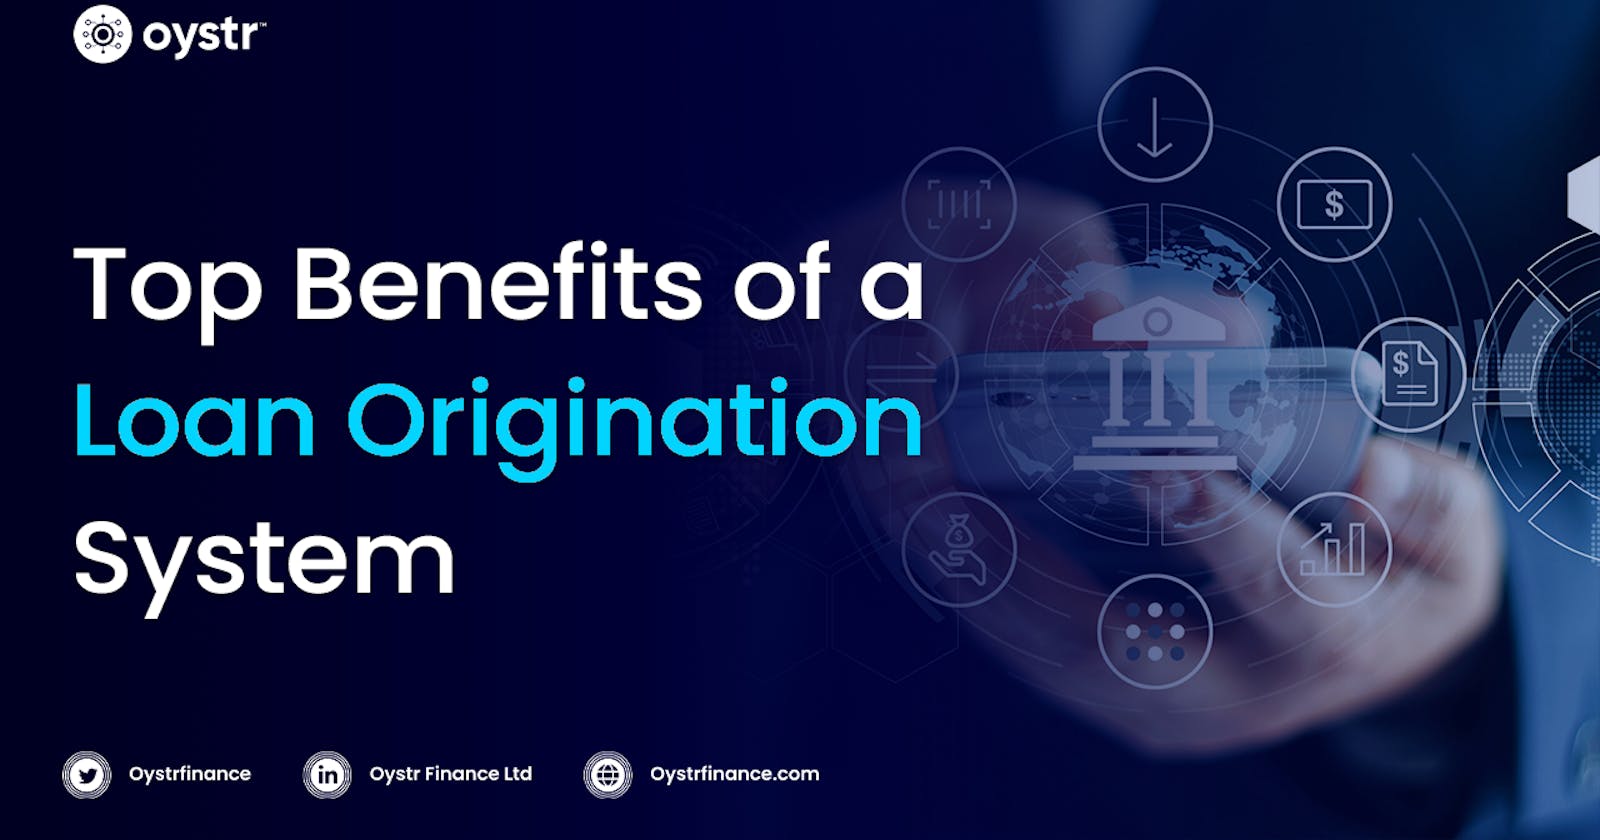 Top Benefits of Using a Loan Origination System